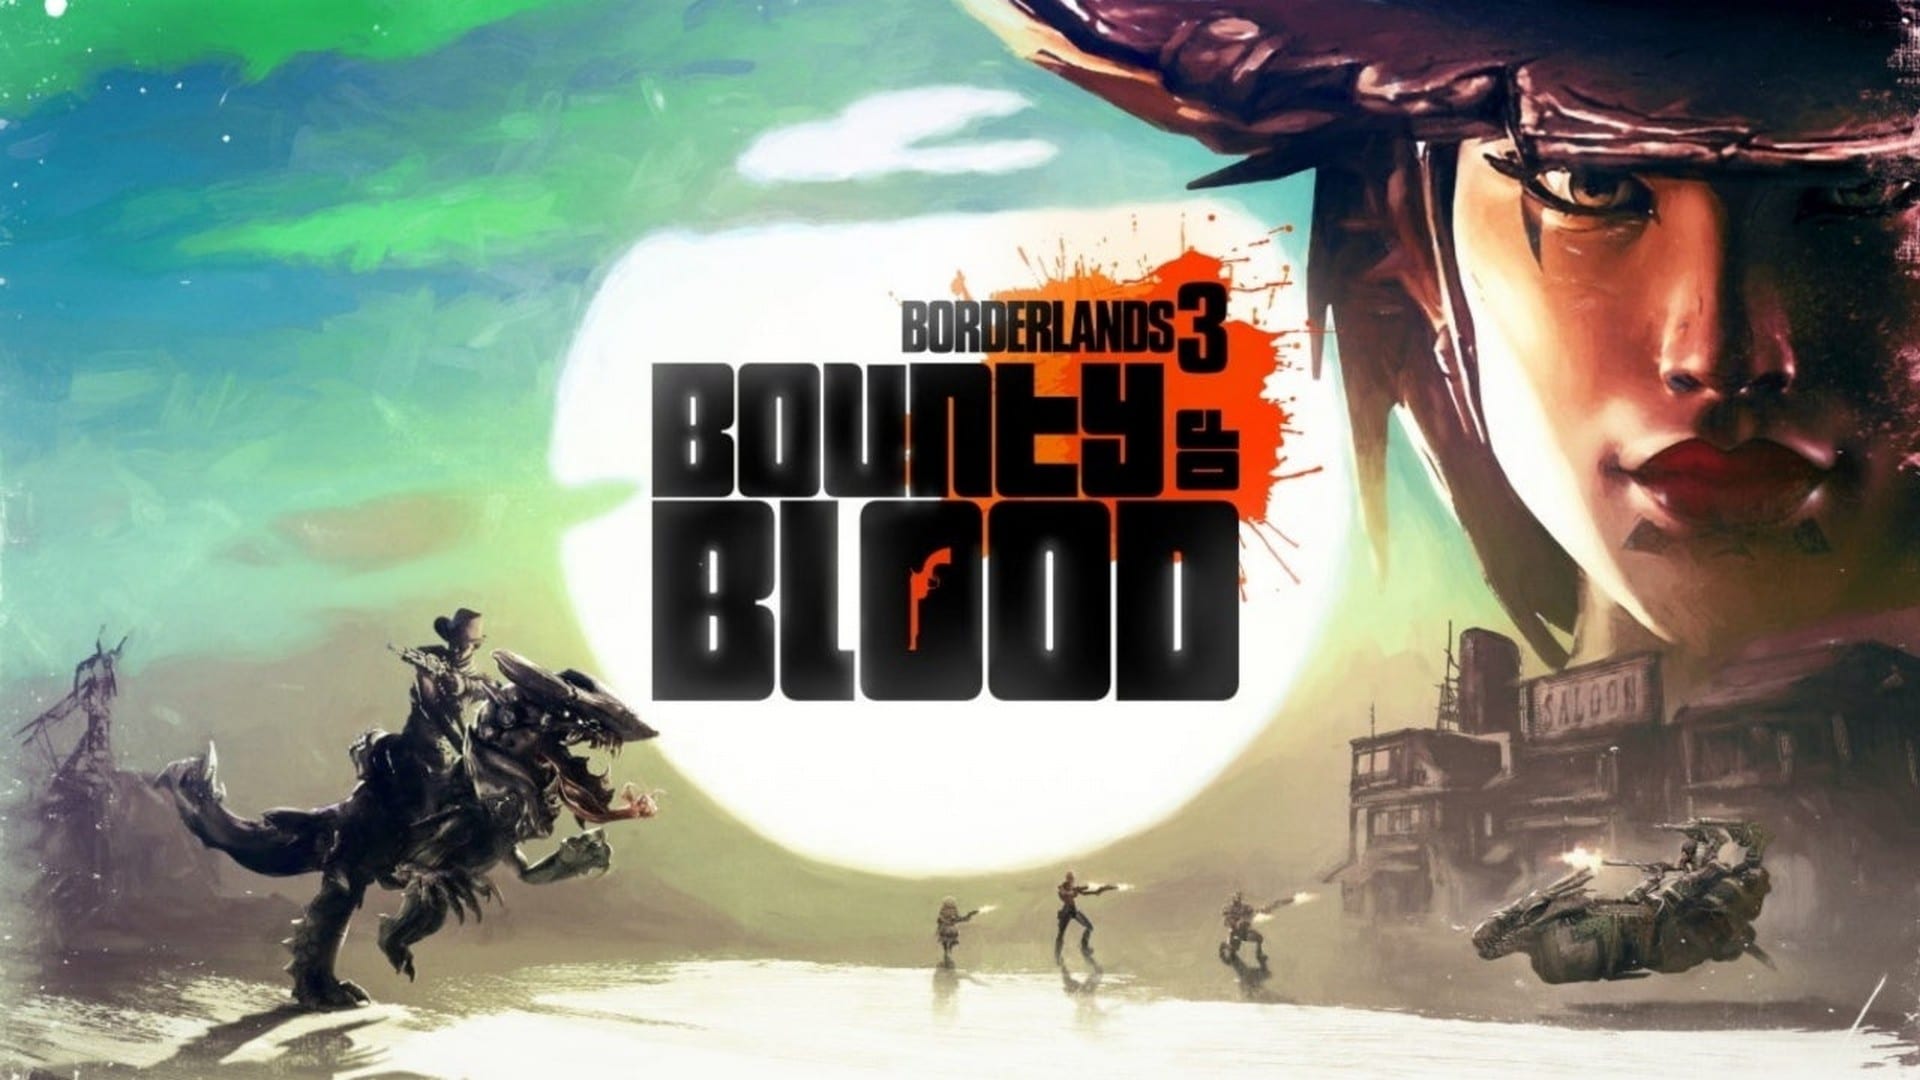 Borderlands 3 – Bounty of Blood Campaign Out Now